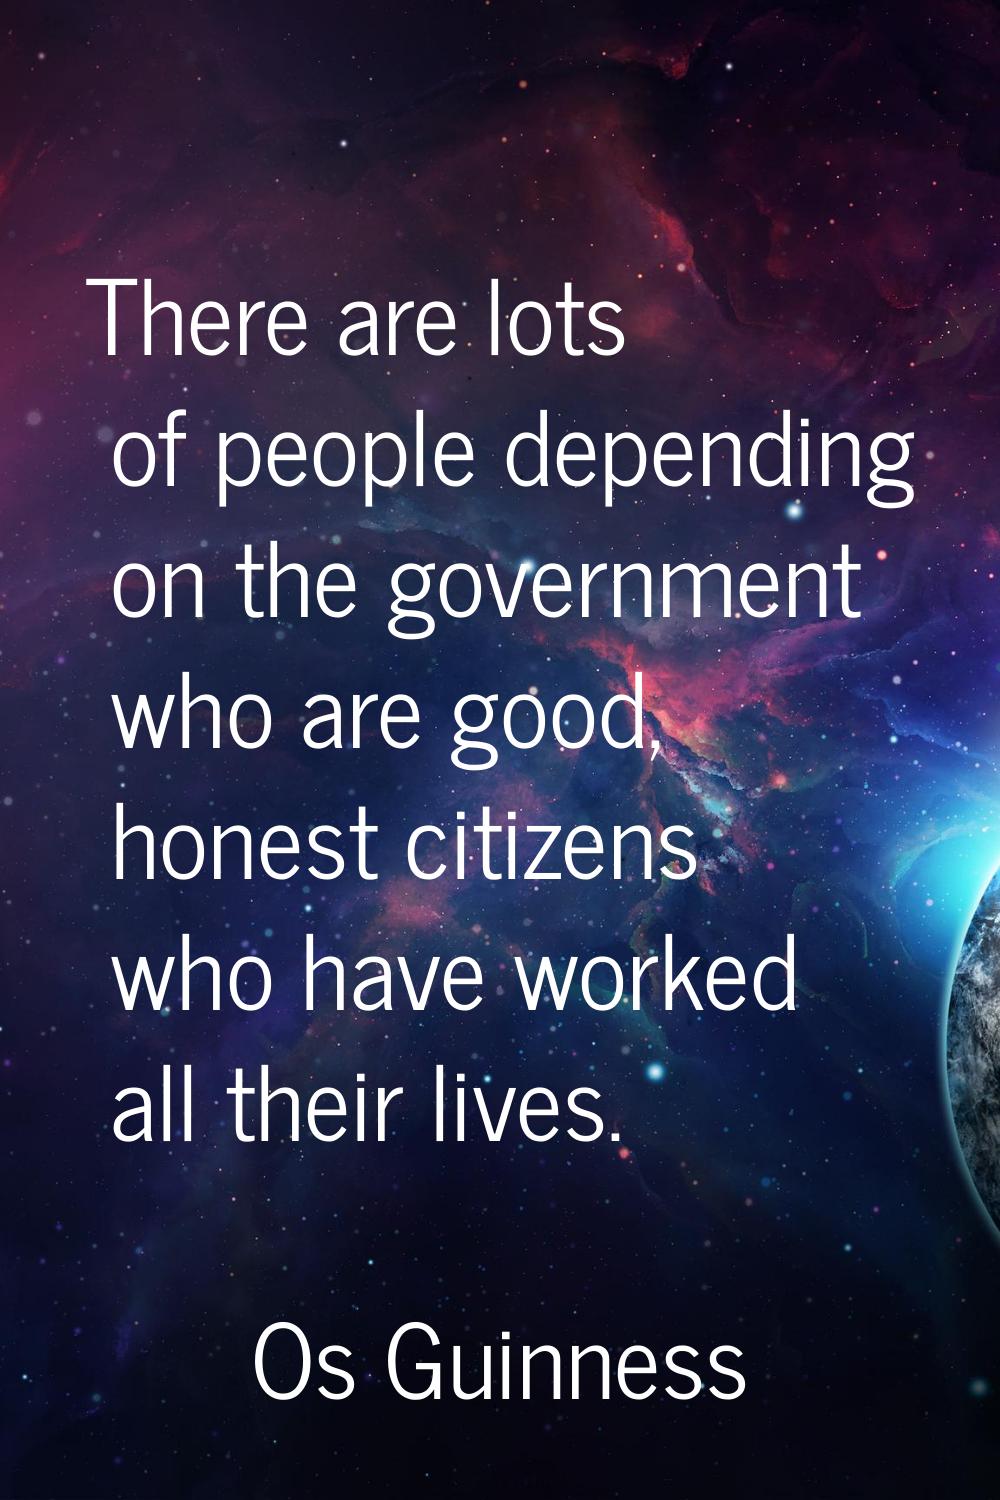 There are lots of people depending on the government who are good, honest citizens who have worked 